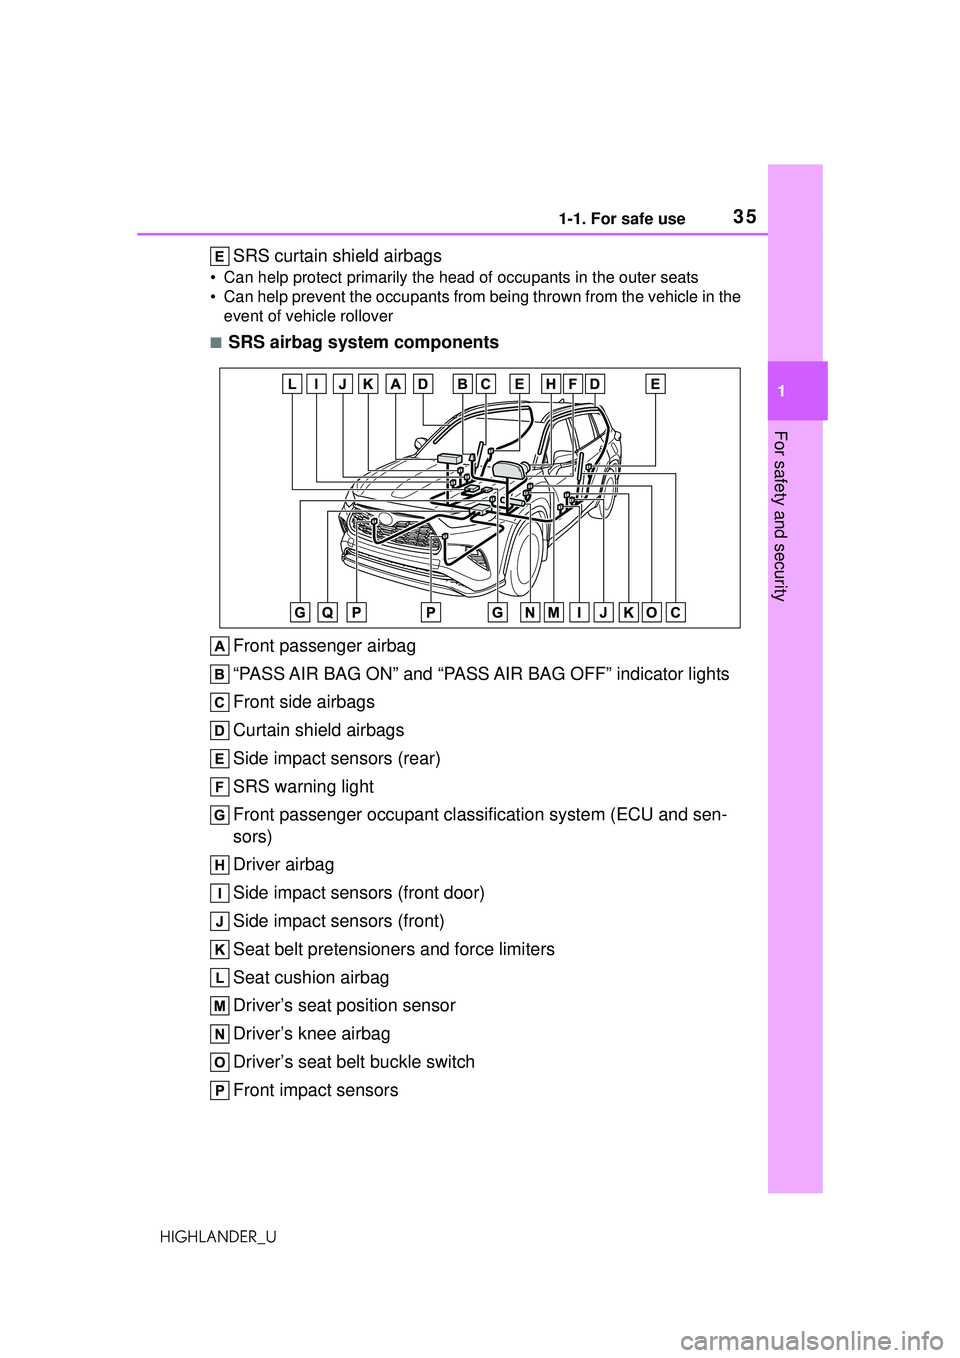 TOYOTA HIGHLANDER 2021  Owners Manual (in English) 351-1. For safe use
1
For safety and security
HIGHLANDER_U
SRS curtain shield airbags
• Can help protect primarily the head of occupants in the outer seats
• Can help prevent the occupants from be